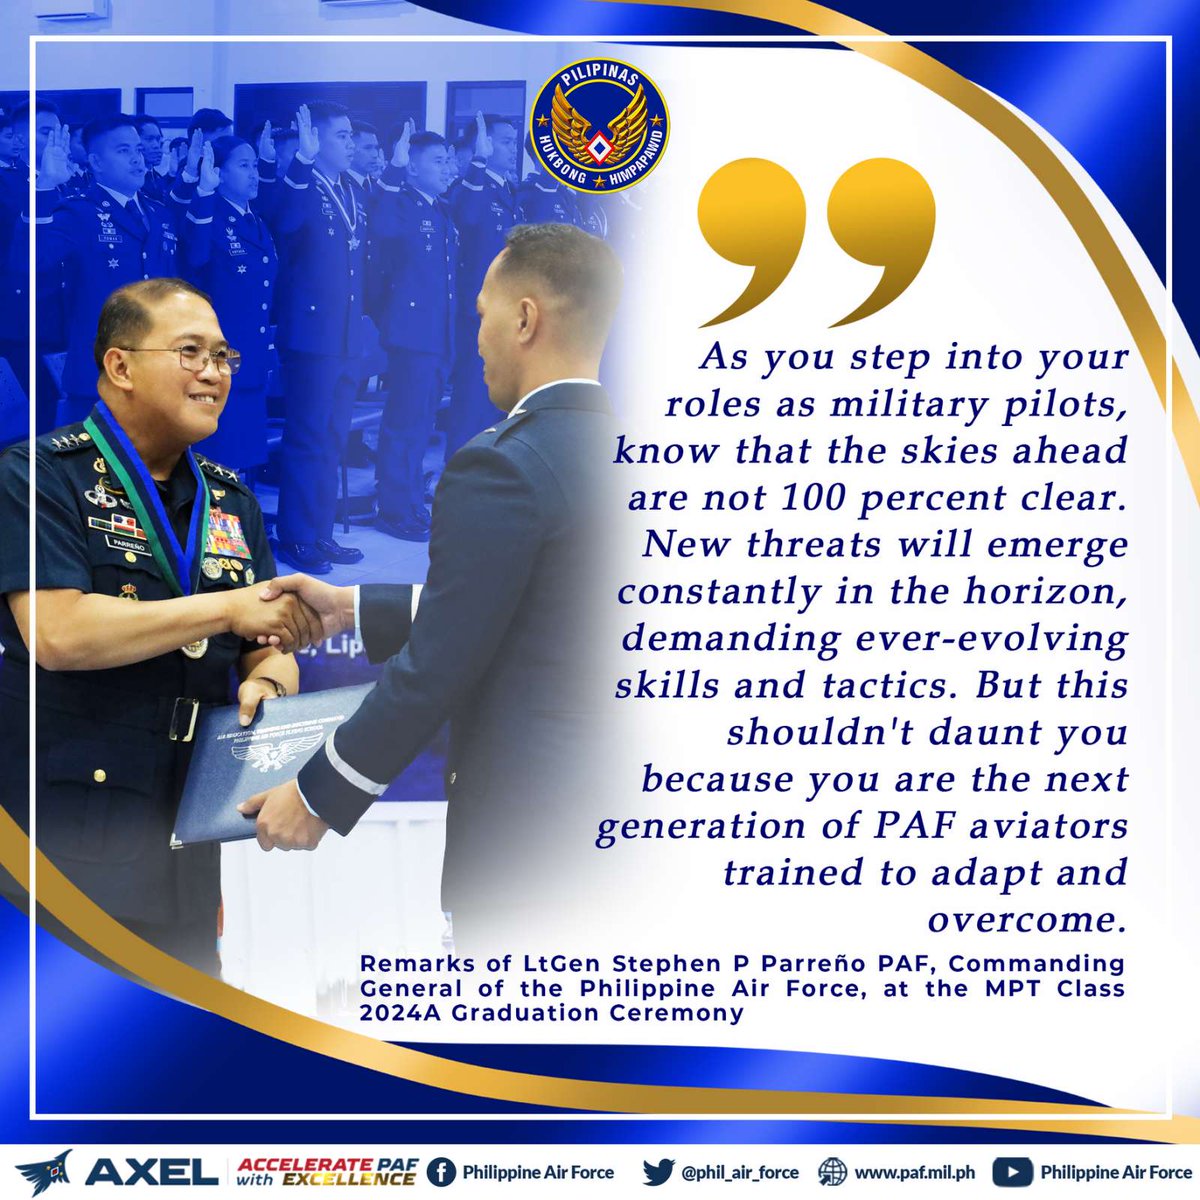 PAF HIGHLIGHTS The CGPAF congratulates MPT Class 2024A, further emphasizing the high expectations that the graduates must carry on and the need to uphold excellence as they step into larger and challenging roles, as they take flight as pilots of the Philippine Air Force.